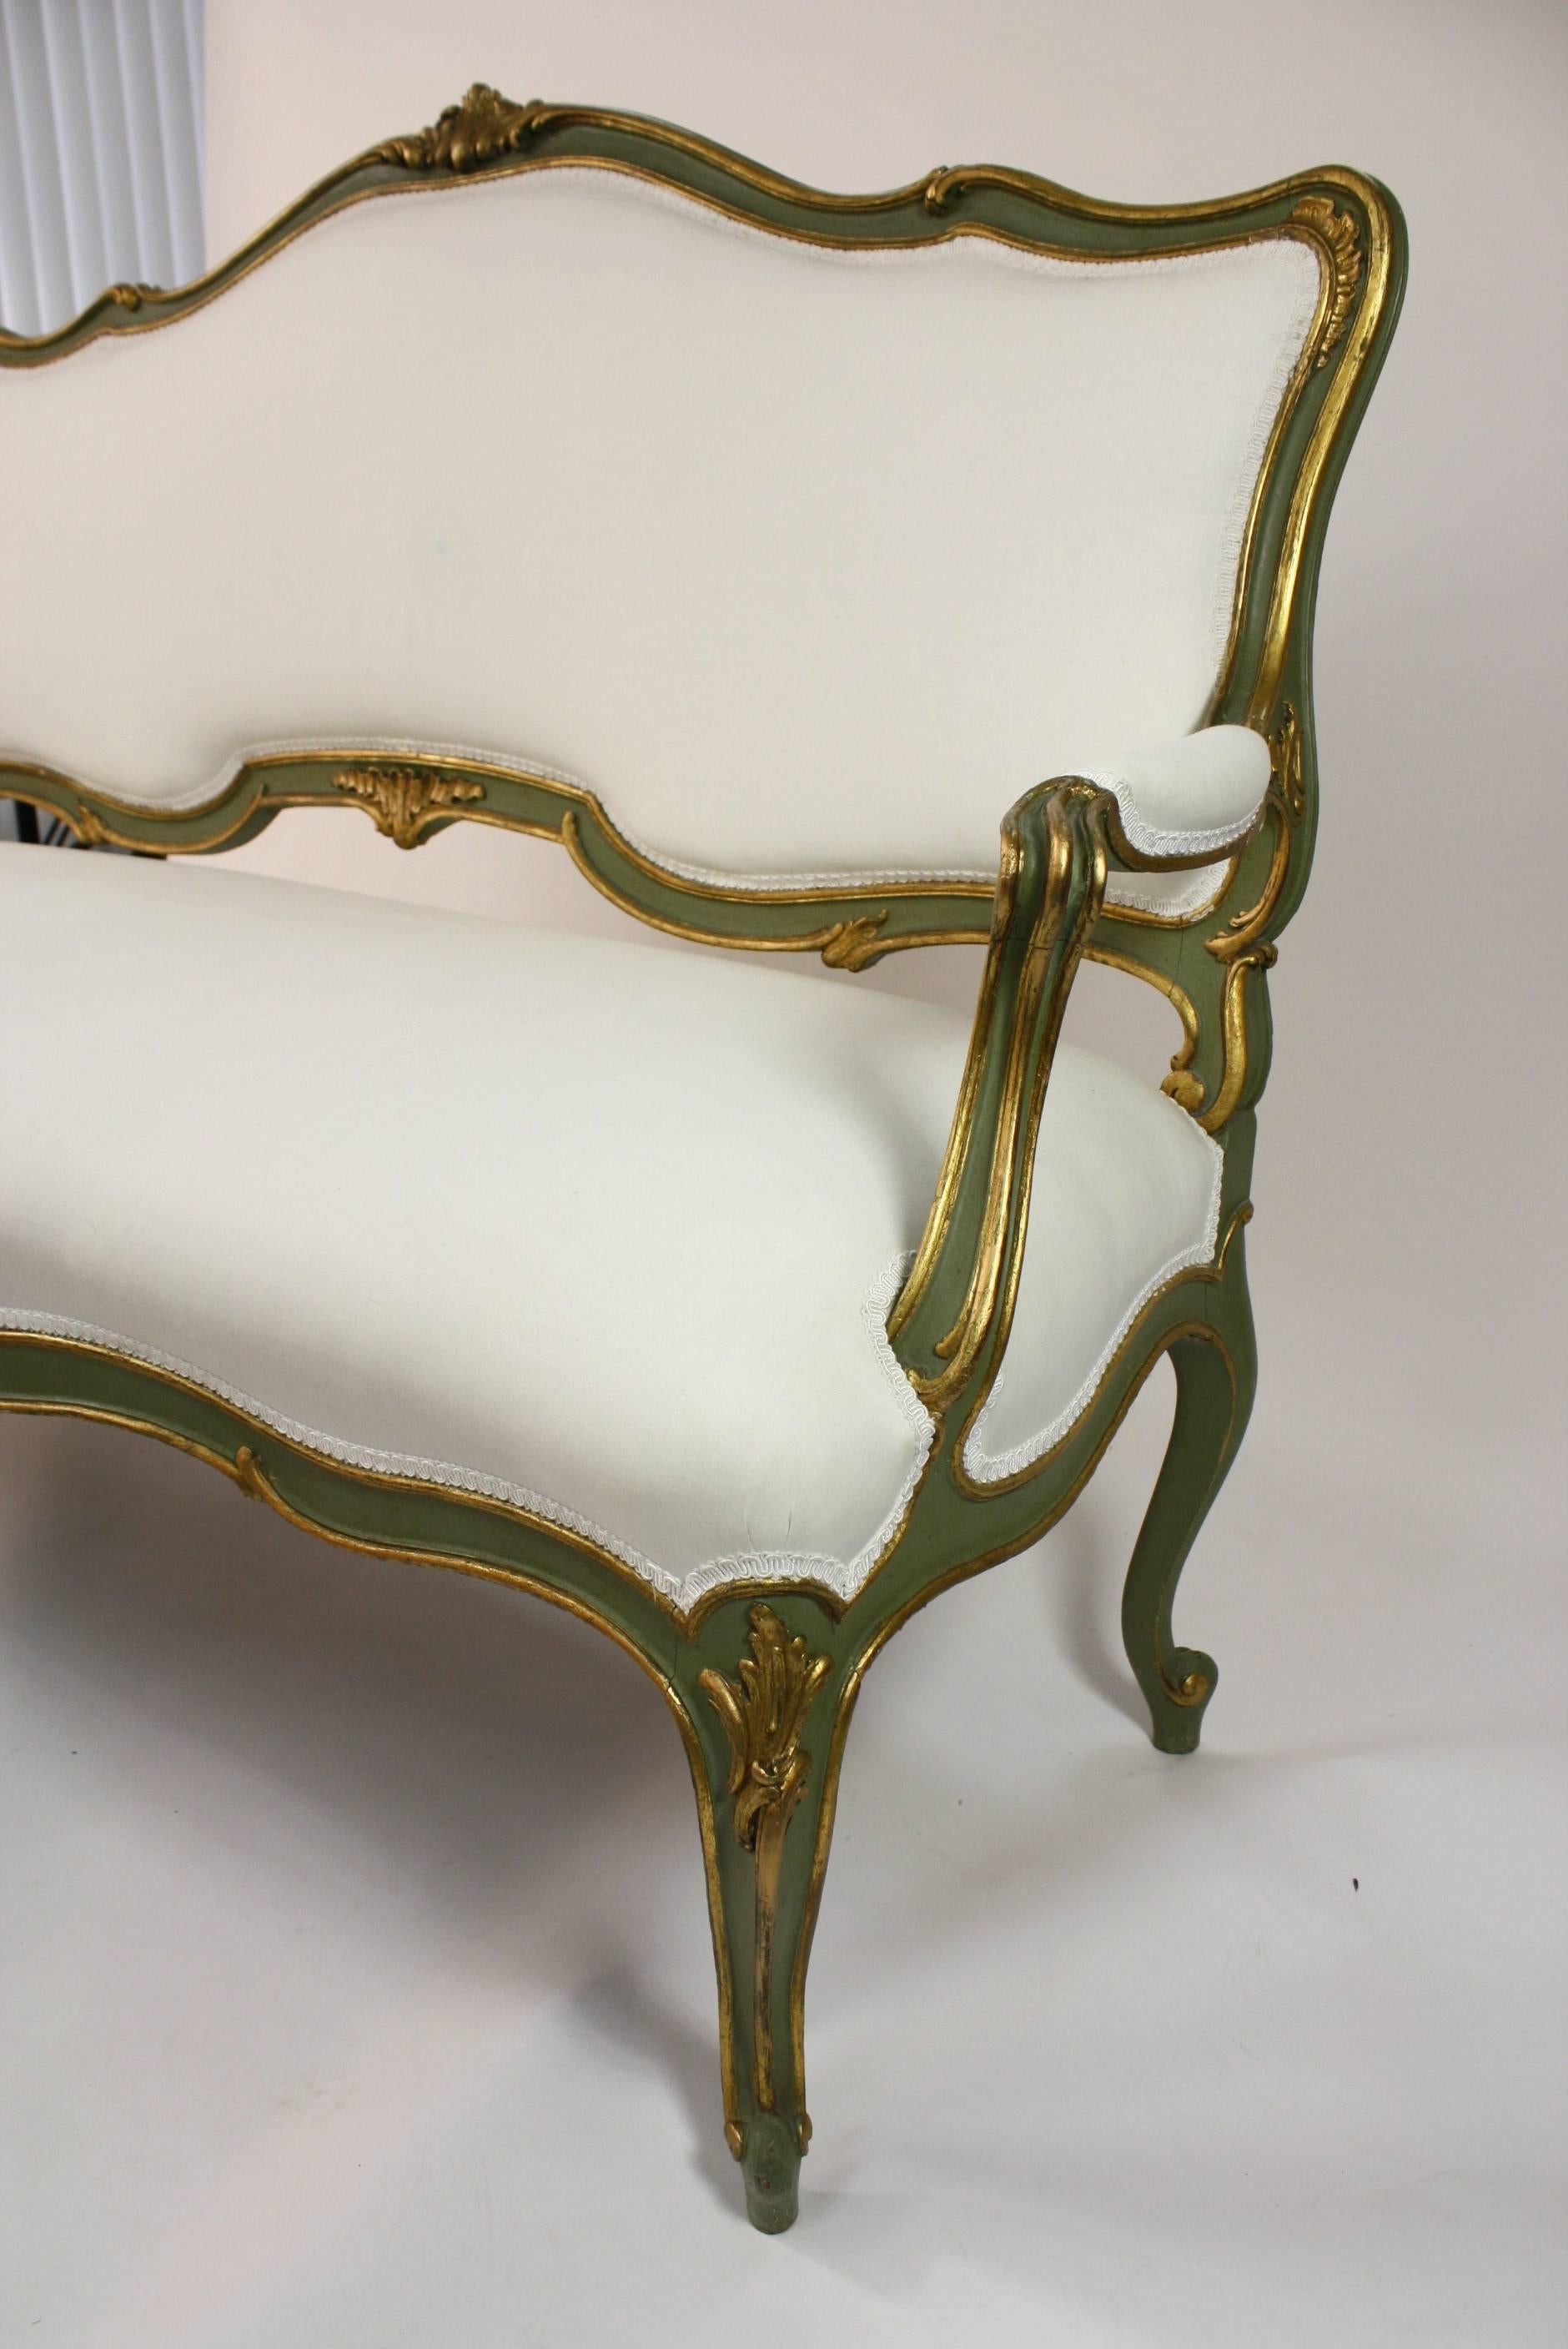 Italian Rococo Style Settee Polychromed in Green and Gold For Sale 2